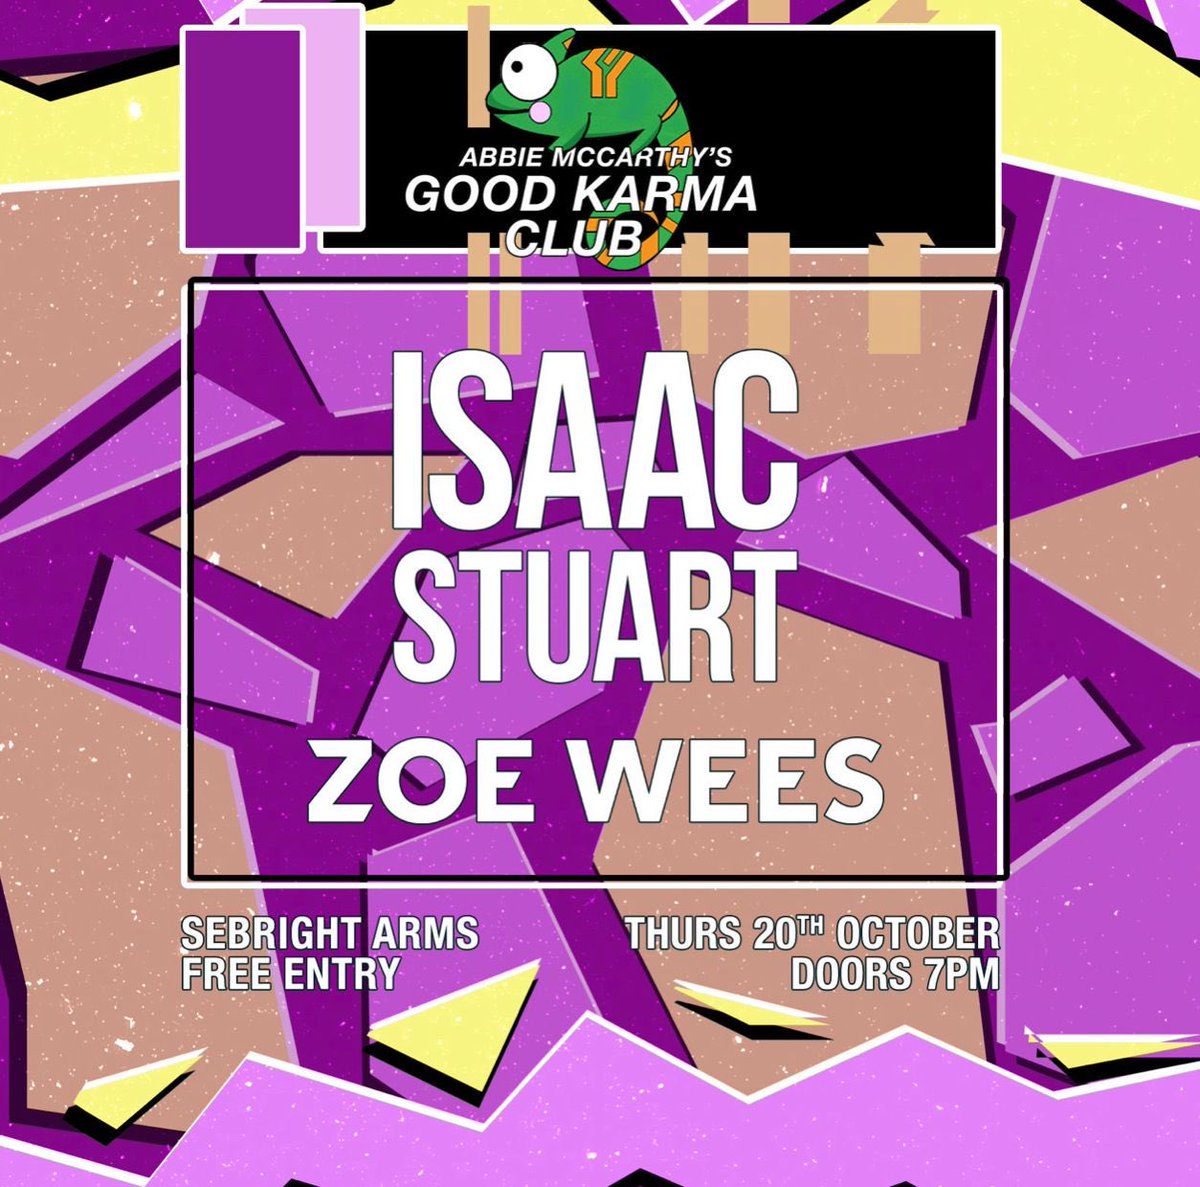 can’t wait to play at @AbbieAbbiemac’s Good Karma Club in London next Thursday !! tickets are FREE ✨ see you there 🖤 tickets: zoewees.lnk.to/AbbieMcCarthy @goodkarma_club